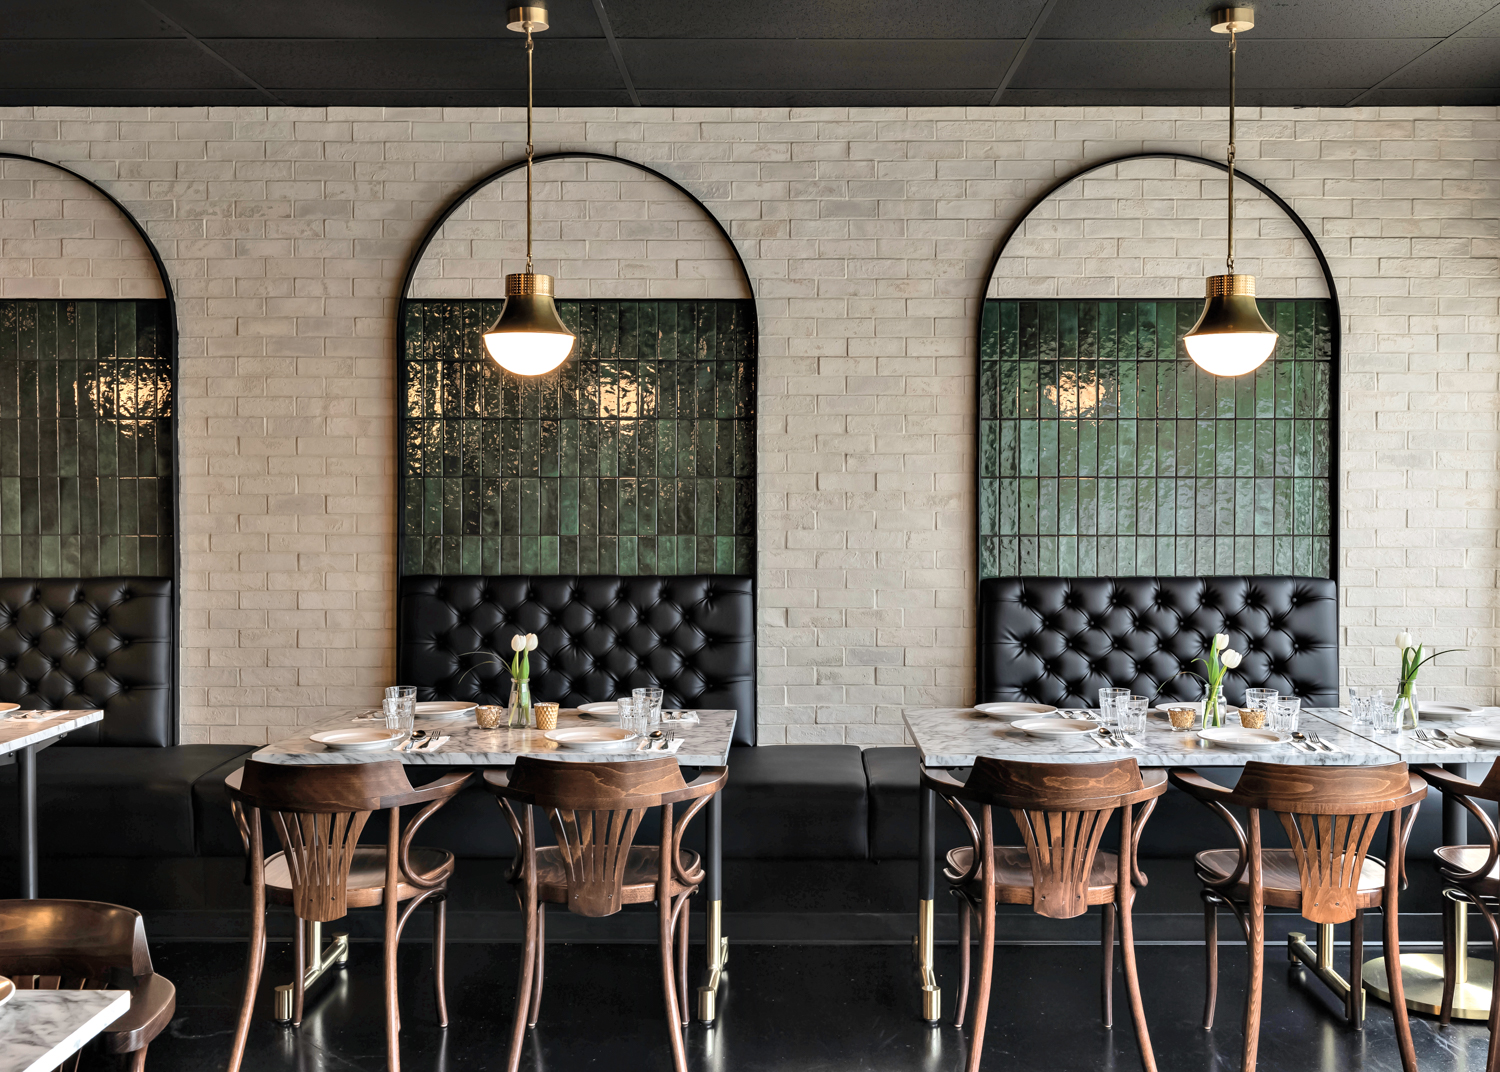 Ayesha Usman restaurant with cream and dark green tile, black tufted banquettes, wood chairs and pendant lighting